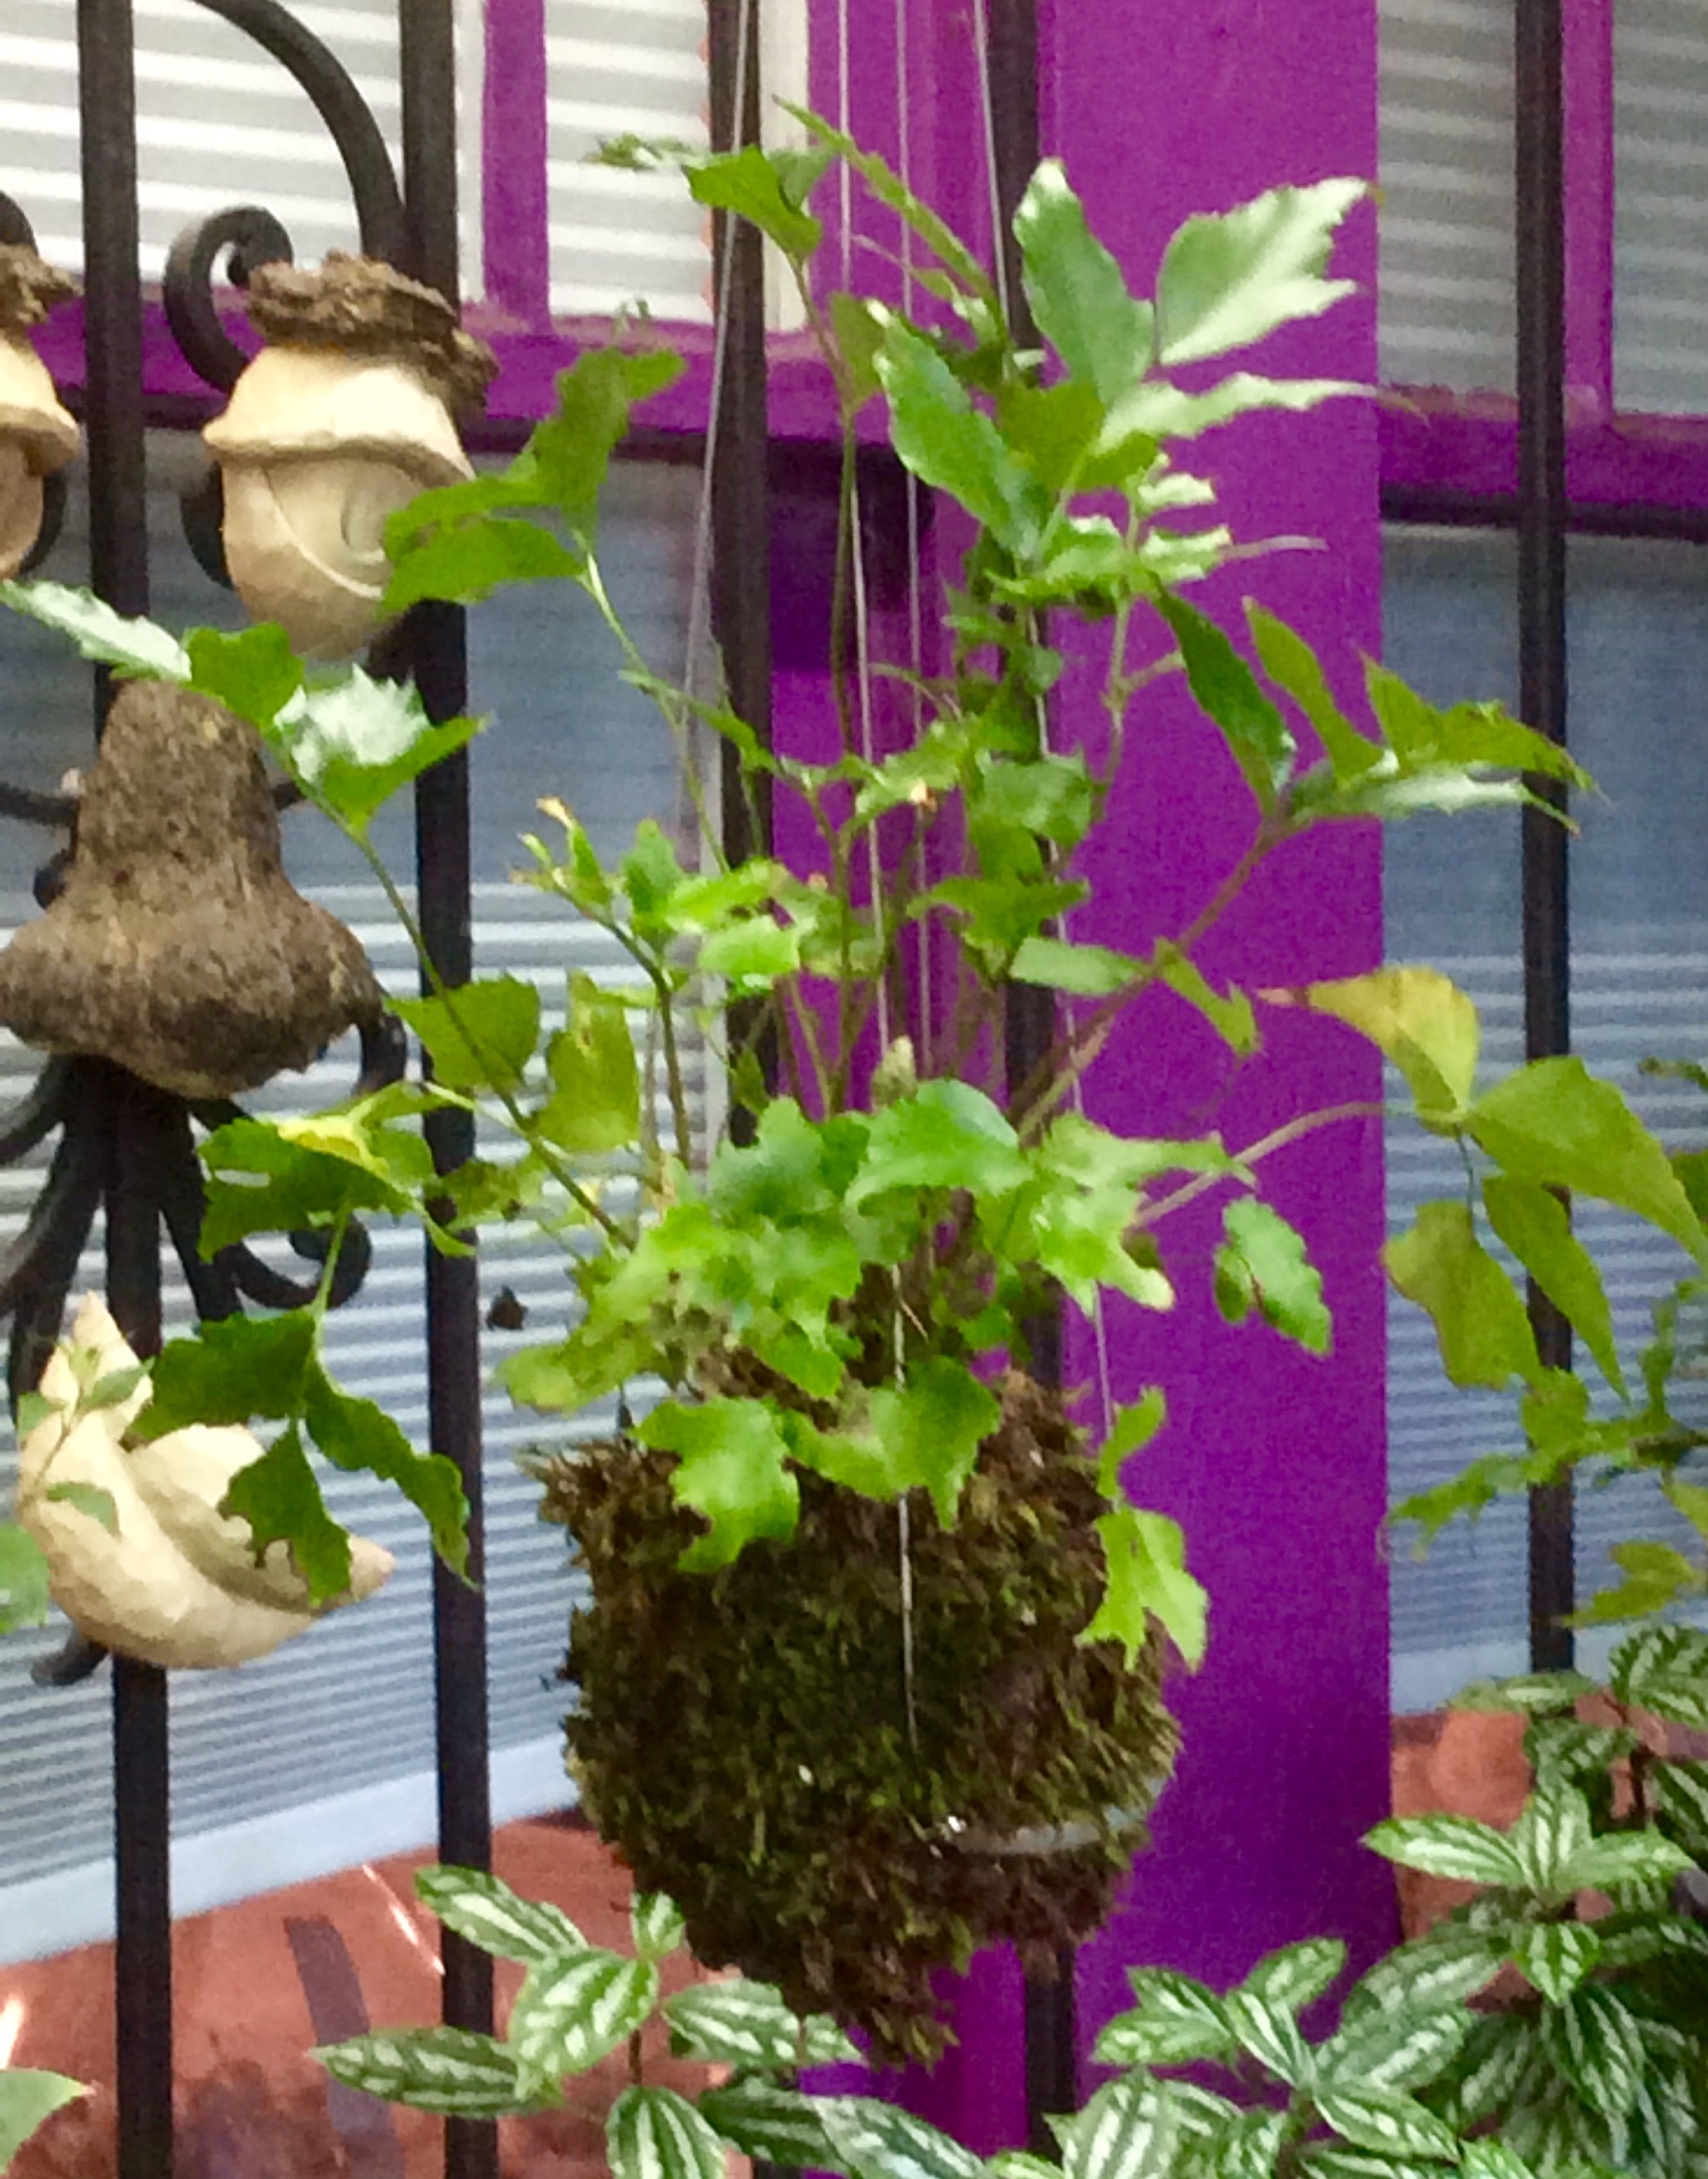 Ferns are traditionally used in kokedama.  This holly fern is a beauty, don't you think?